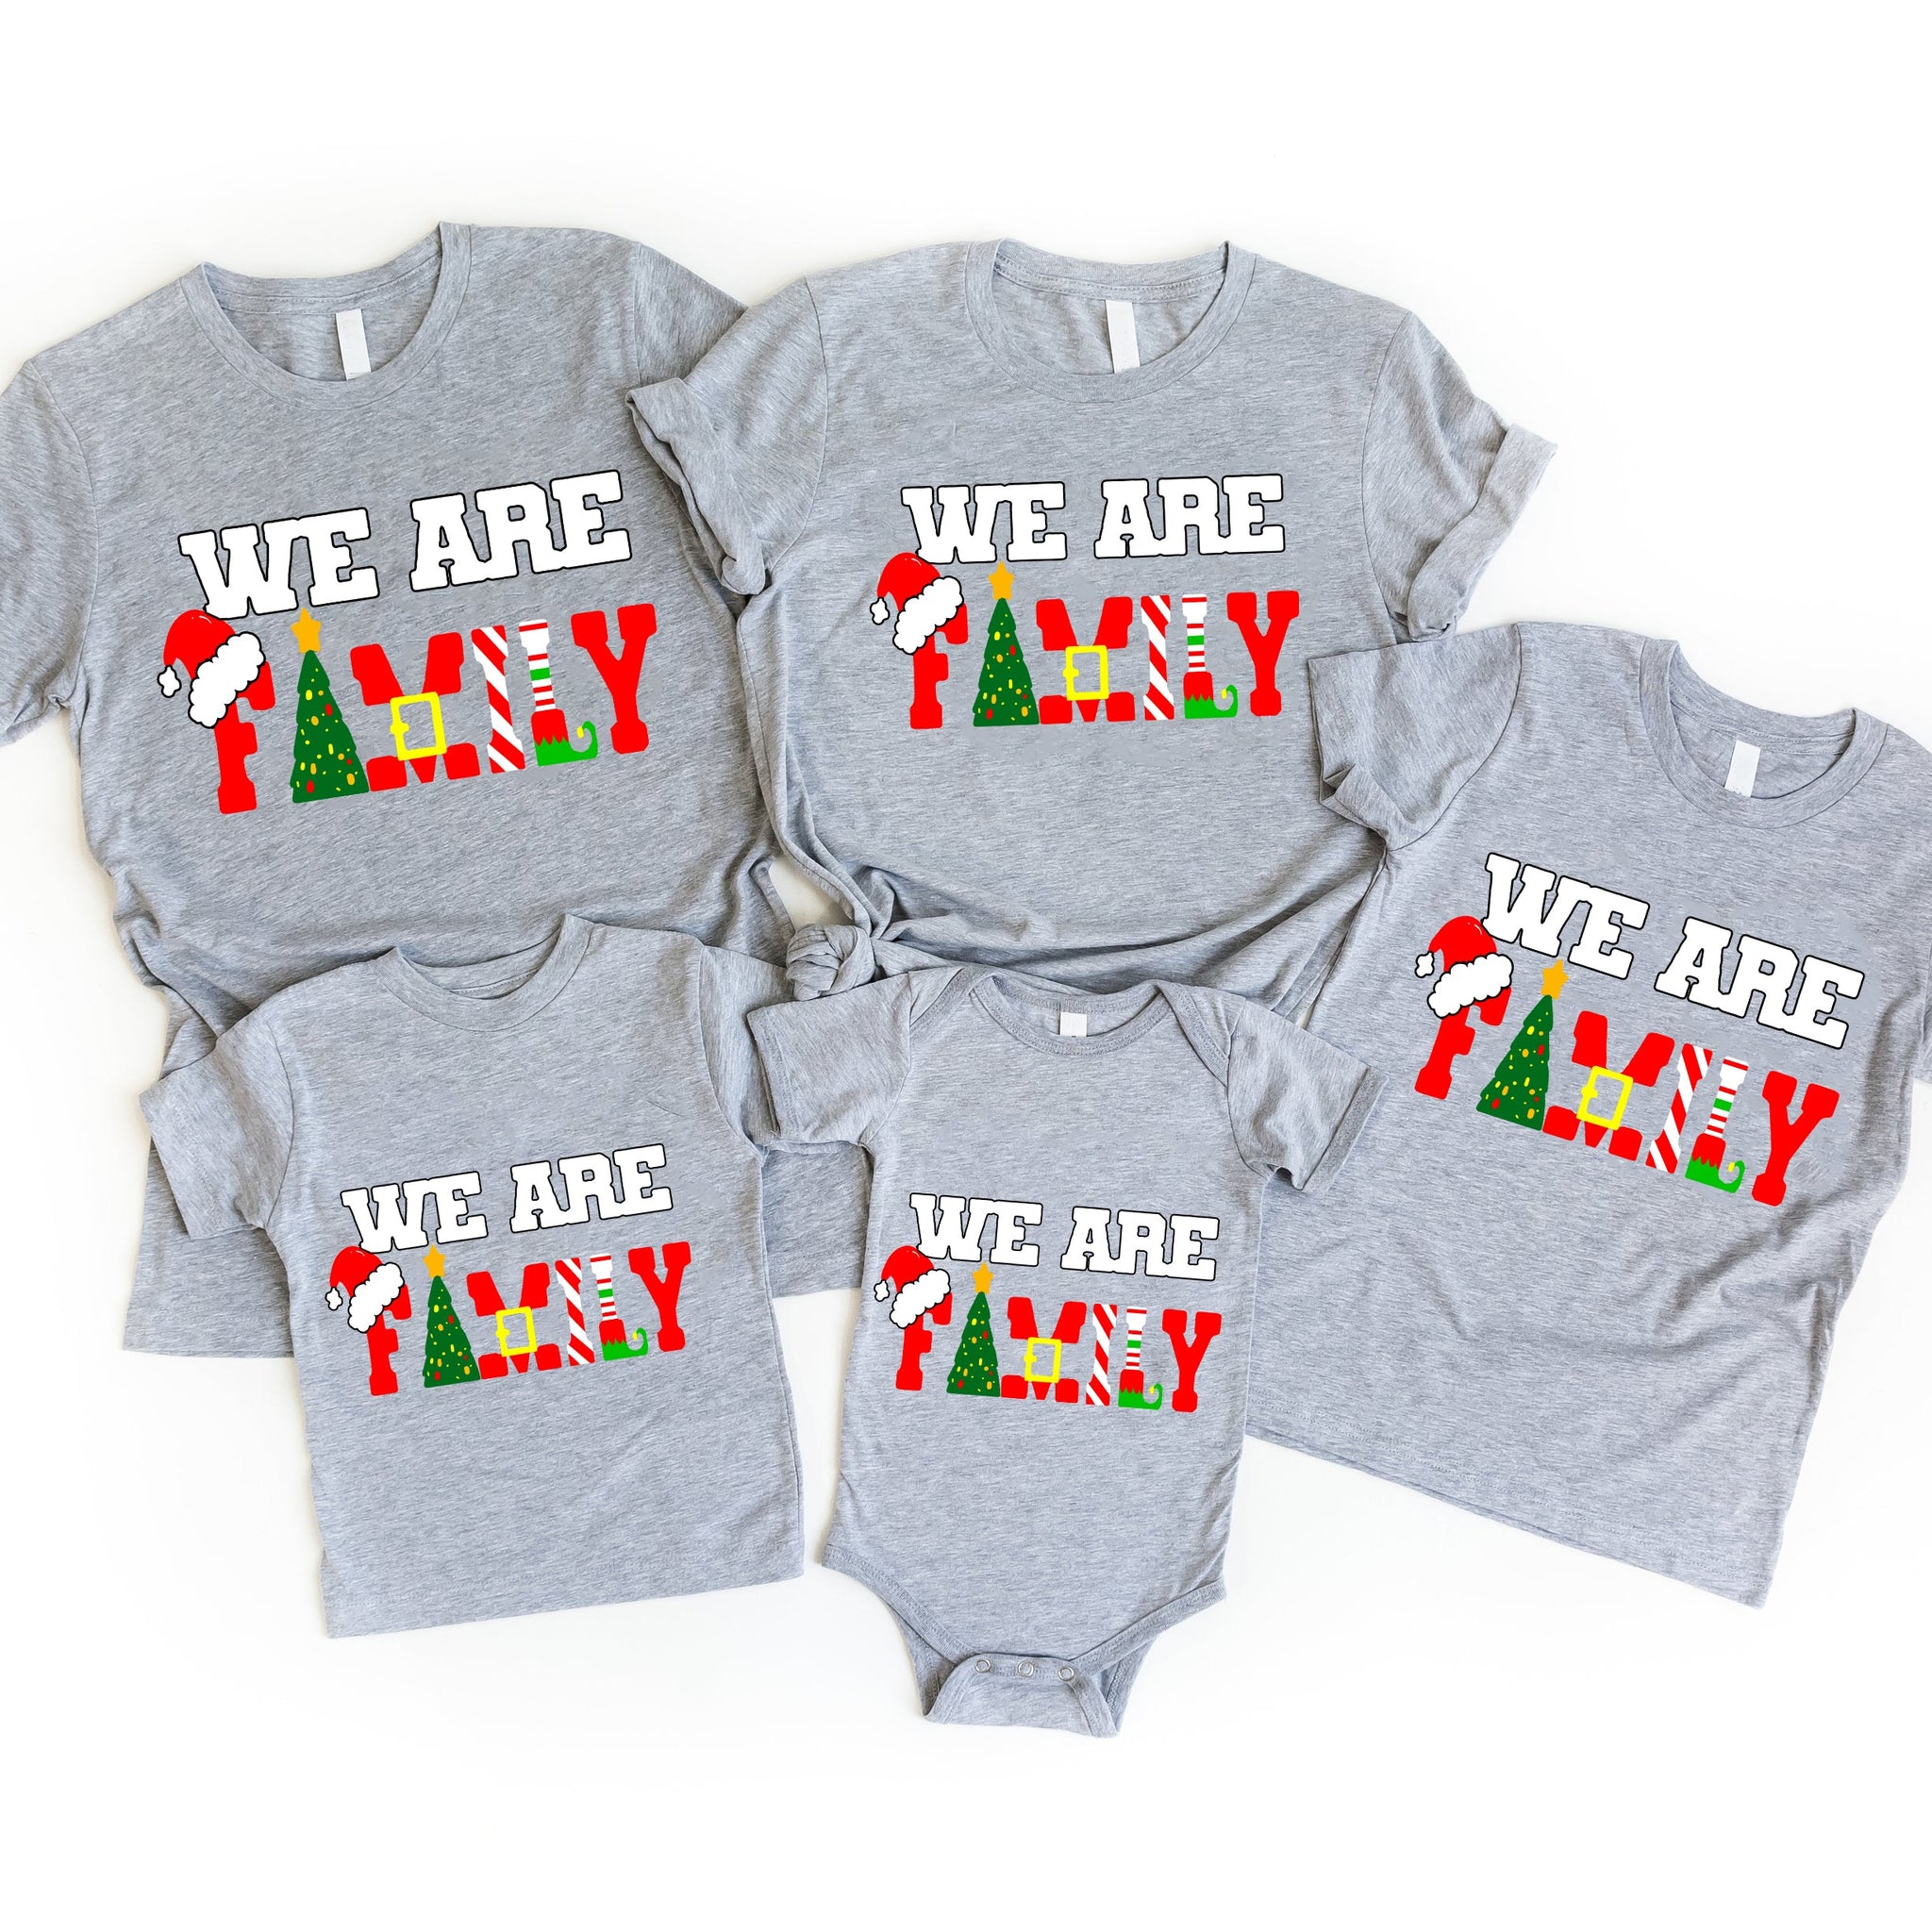 'We Are Family' Colorful Letter Pattern Family Christmas Matching Pajamas Tops Cute Gray Short Sleeve T-shirts With Dog Bandana